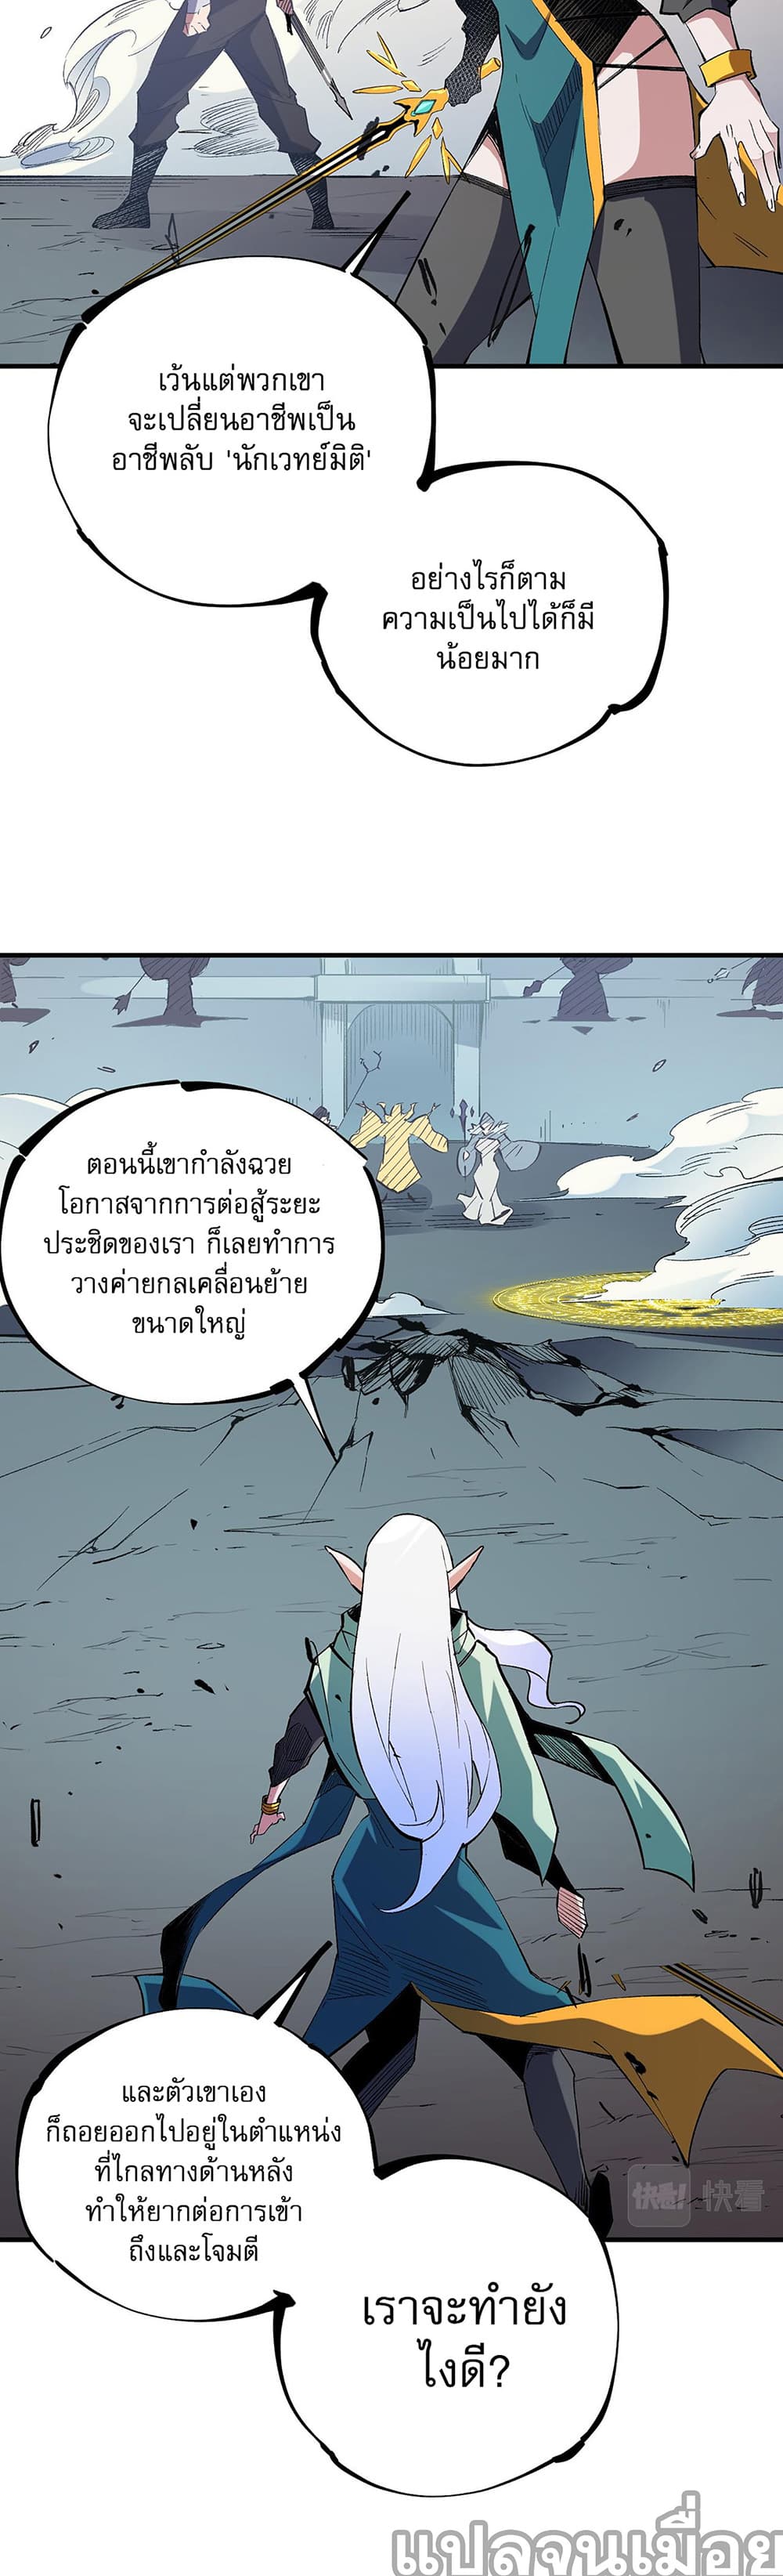 Job Changing for the Entire Population: The Jobless Me Will Terminate the Gods ฉันคือผู้เล่นไร้อาชีพที่สังหารเหล่าเทพ 36-36